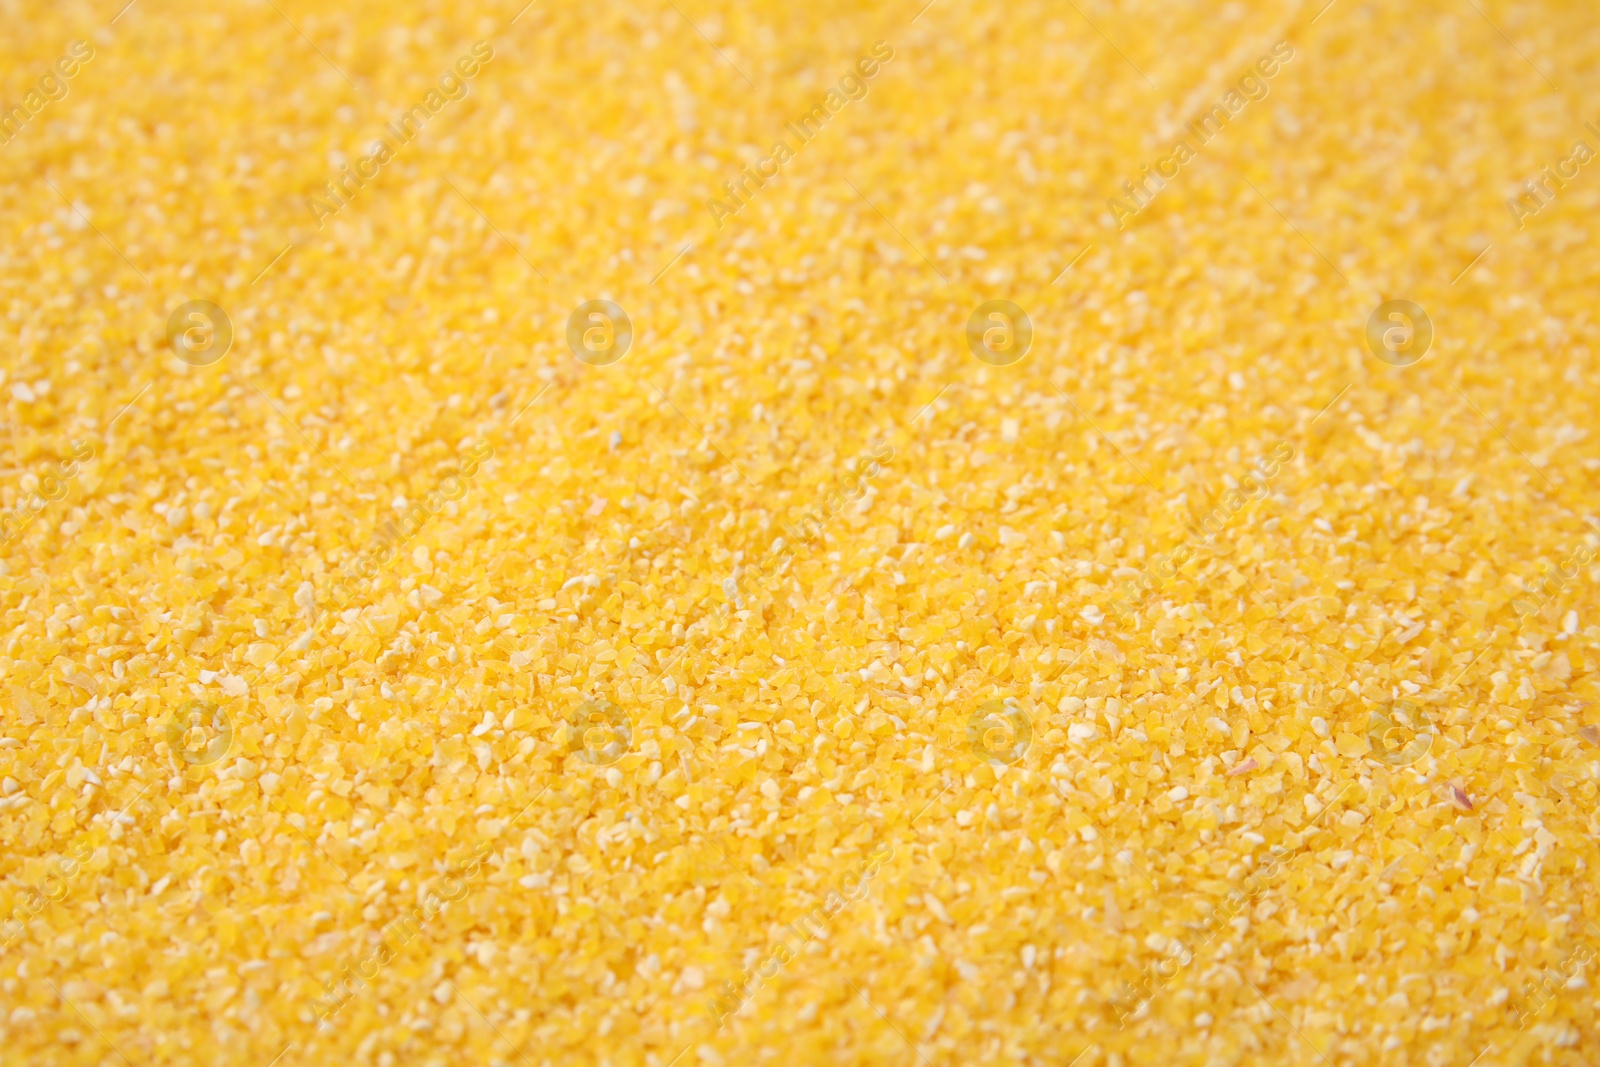 Photo of Raw corn grits as background, closeup view